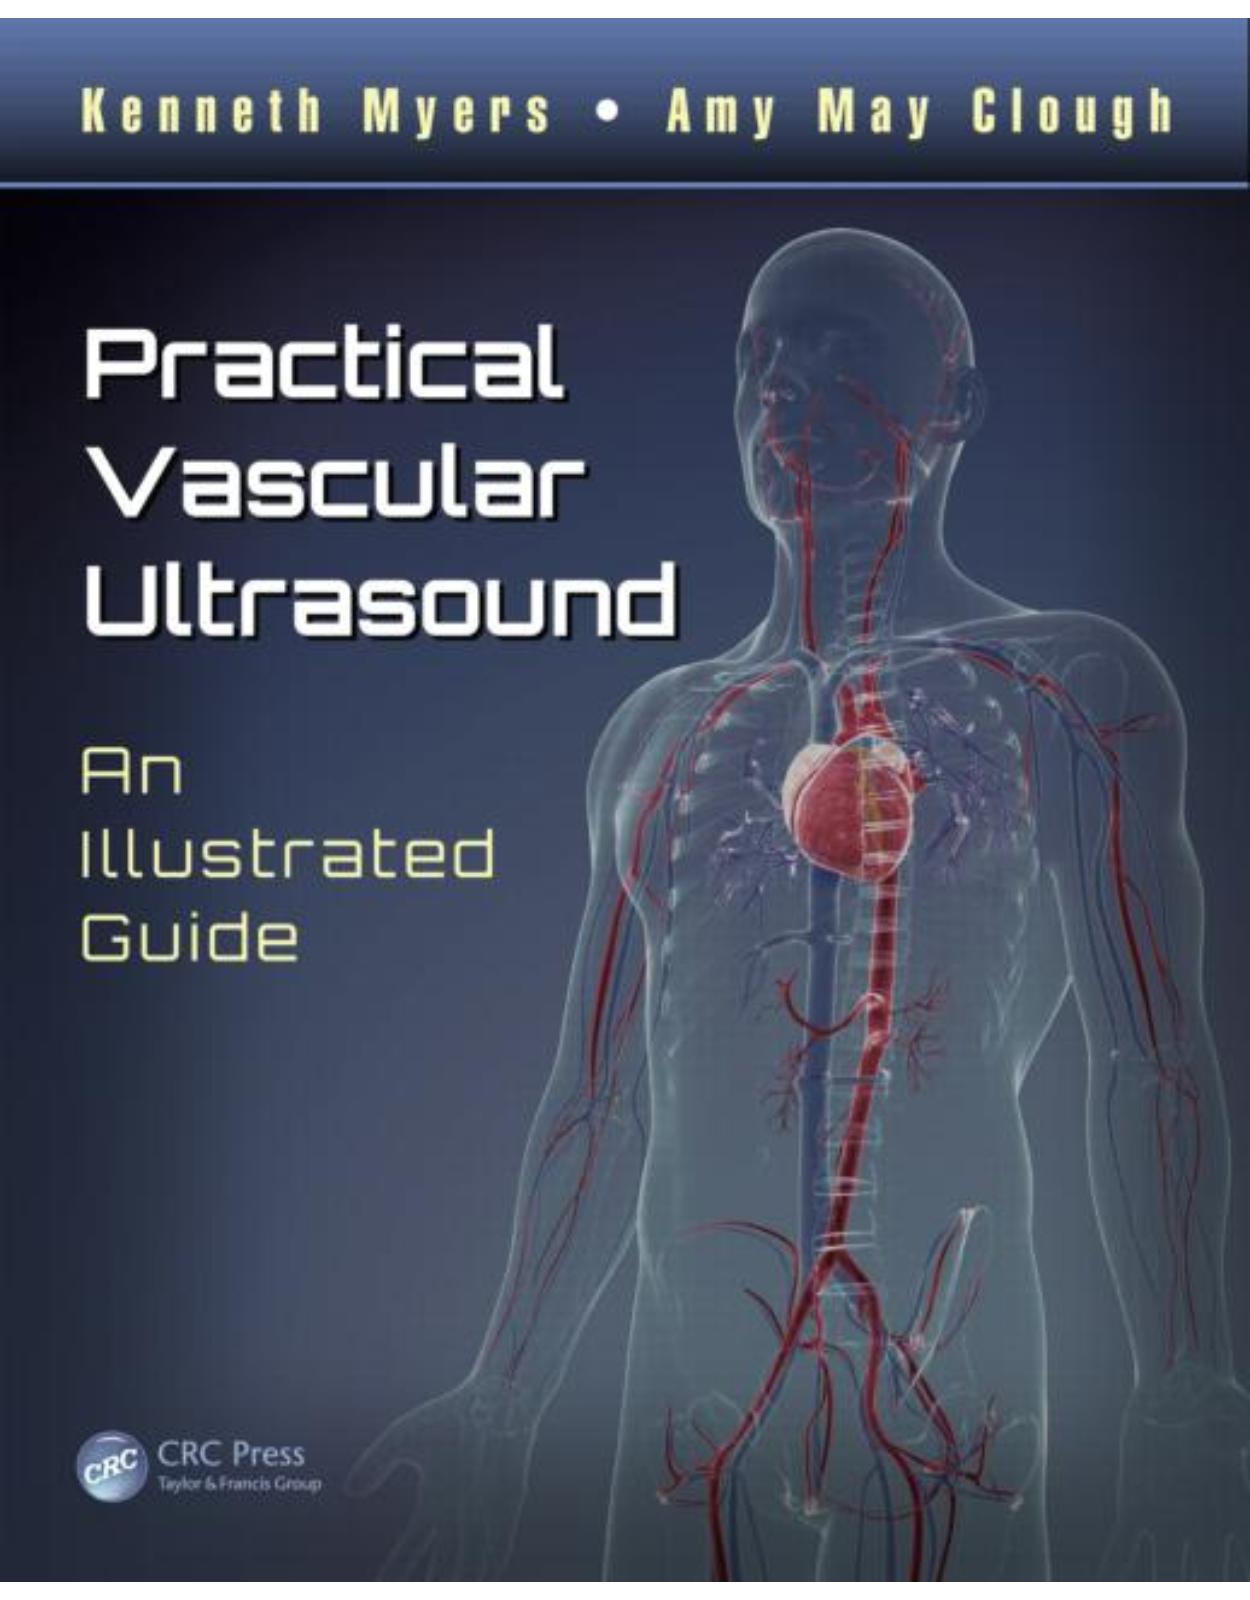 Practical Vascular Ultrasound: An Illustrated Guide